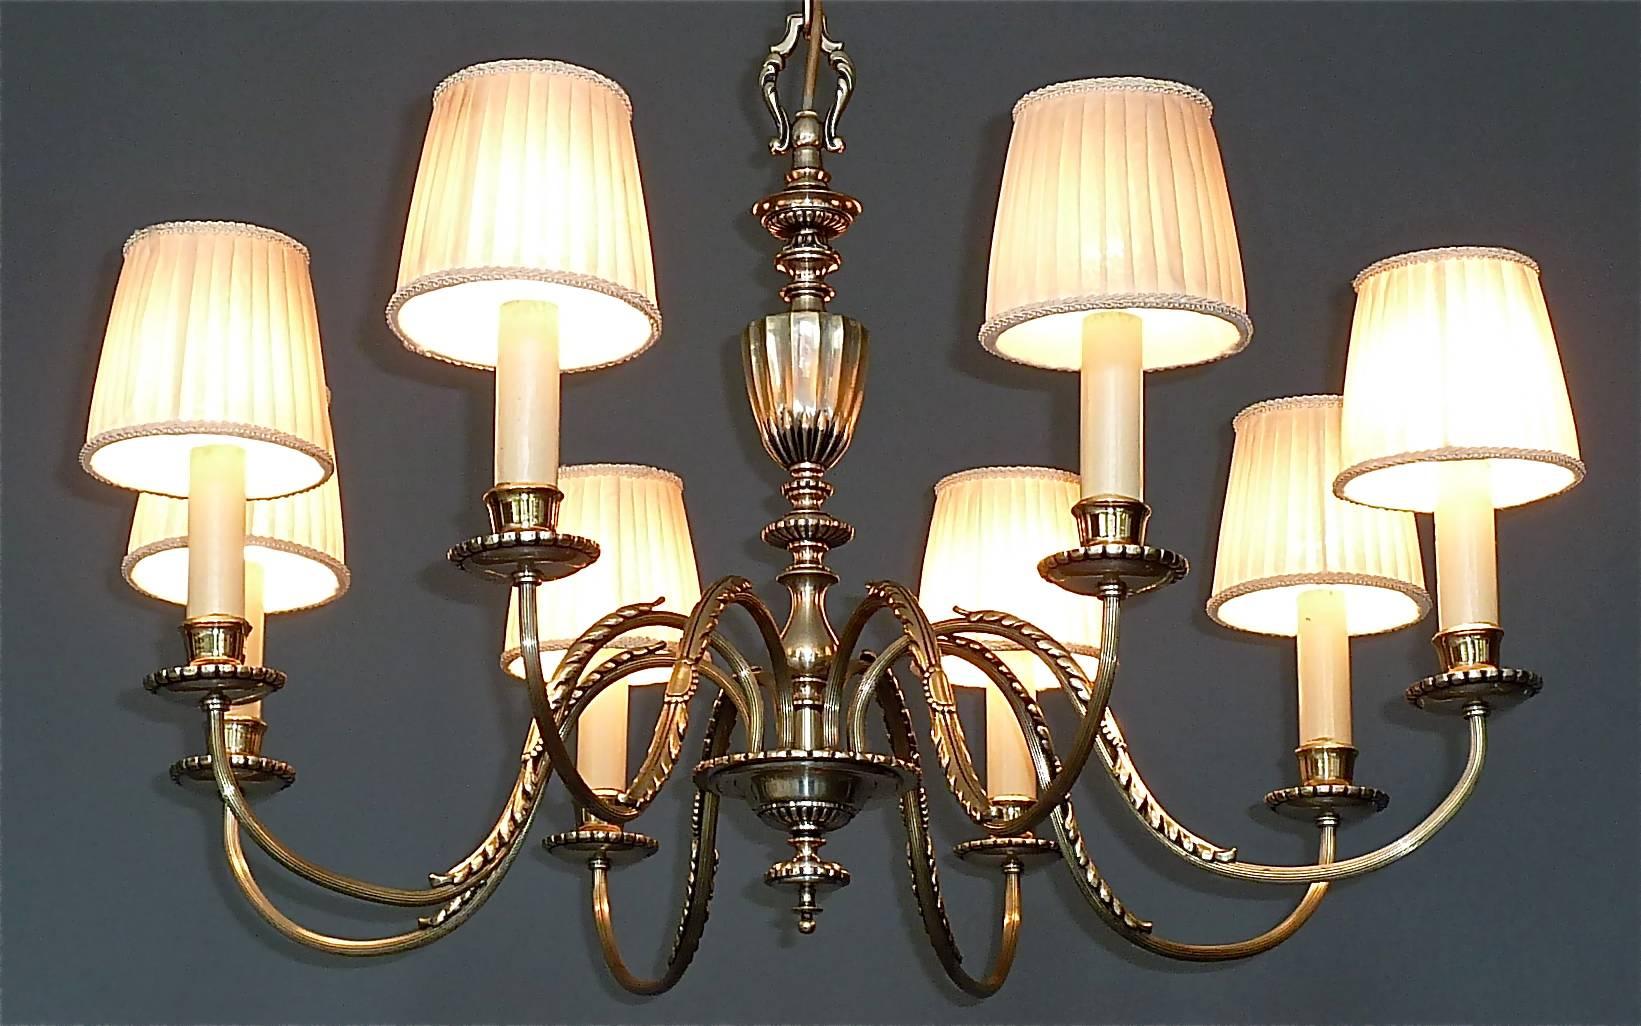 Elegant Large Empire Style Classical Silver Chandelier Eight-Light Pendant, 1920 For Sale 2